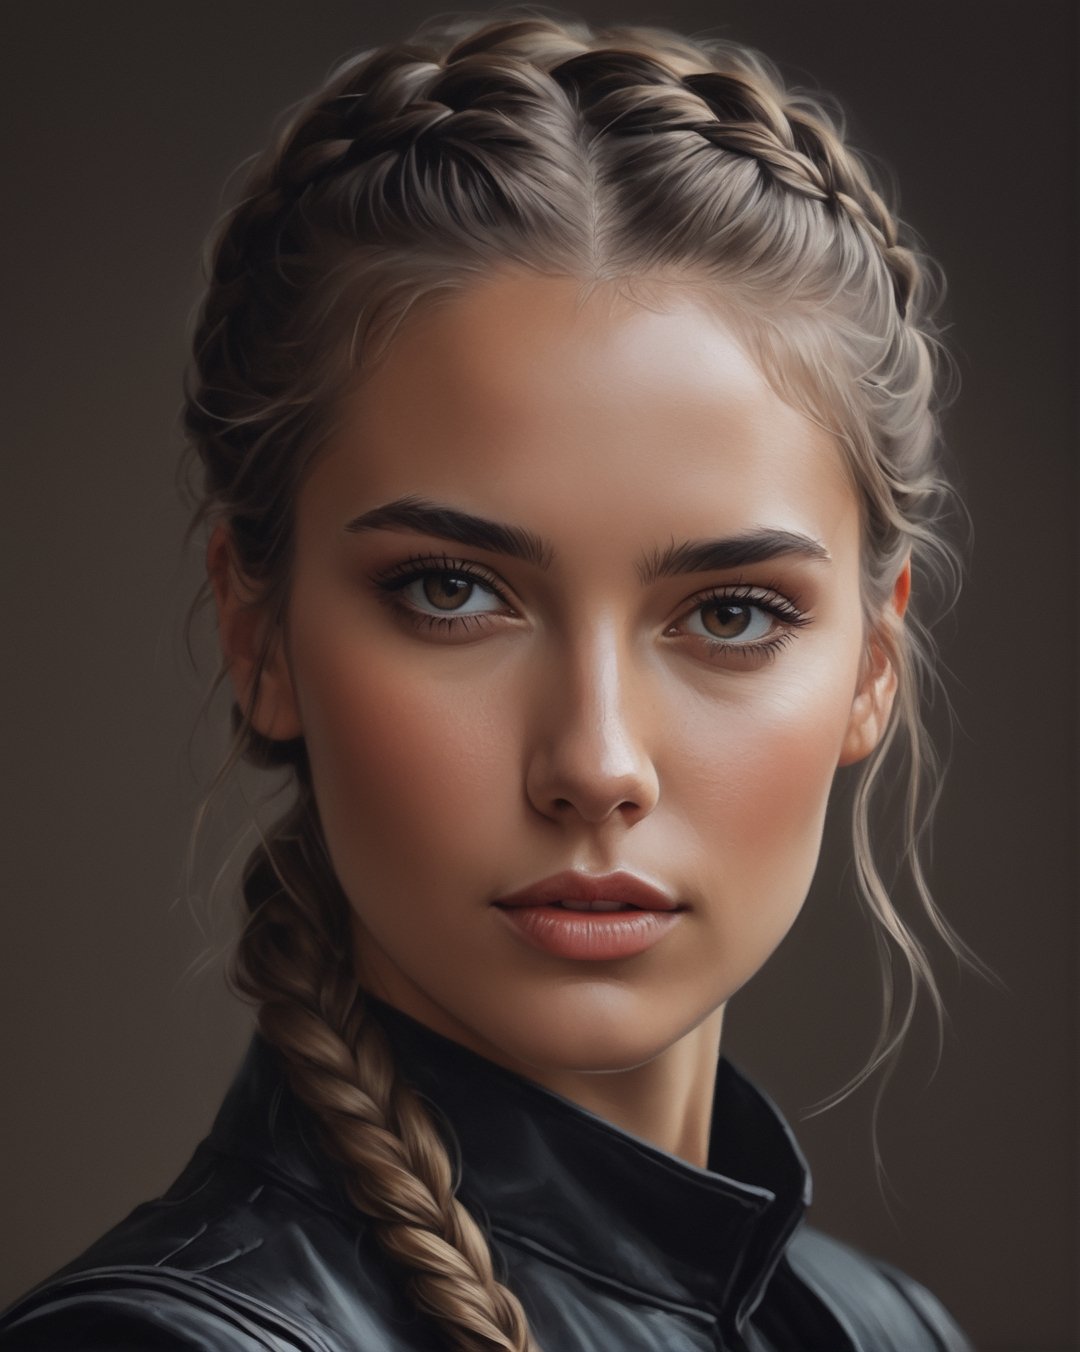  a painting of a woman with a braid in her hair, a digital painting, by Alexander Kanoldt, Artstation, cinematic  portrait, (beautiful) girl, big cheekbones, fully clothed in black leather. painting of sexy, doodle, diego dayer, with round face, realistic - n 9, artist unknown, ann stokes, cute adorable, sharpie, cinemtic look, grainy cinematic, fantasy vibes godlyphoto r3al, detailmaster2, aesthetic portrait, cinematic colors, earthy, moodygrainy cinematic, godlyphoto r3al, detailmaster2, aesthetic portrait, cinematic colors, earthy, moody 